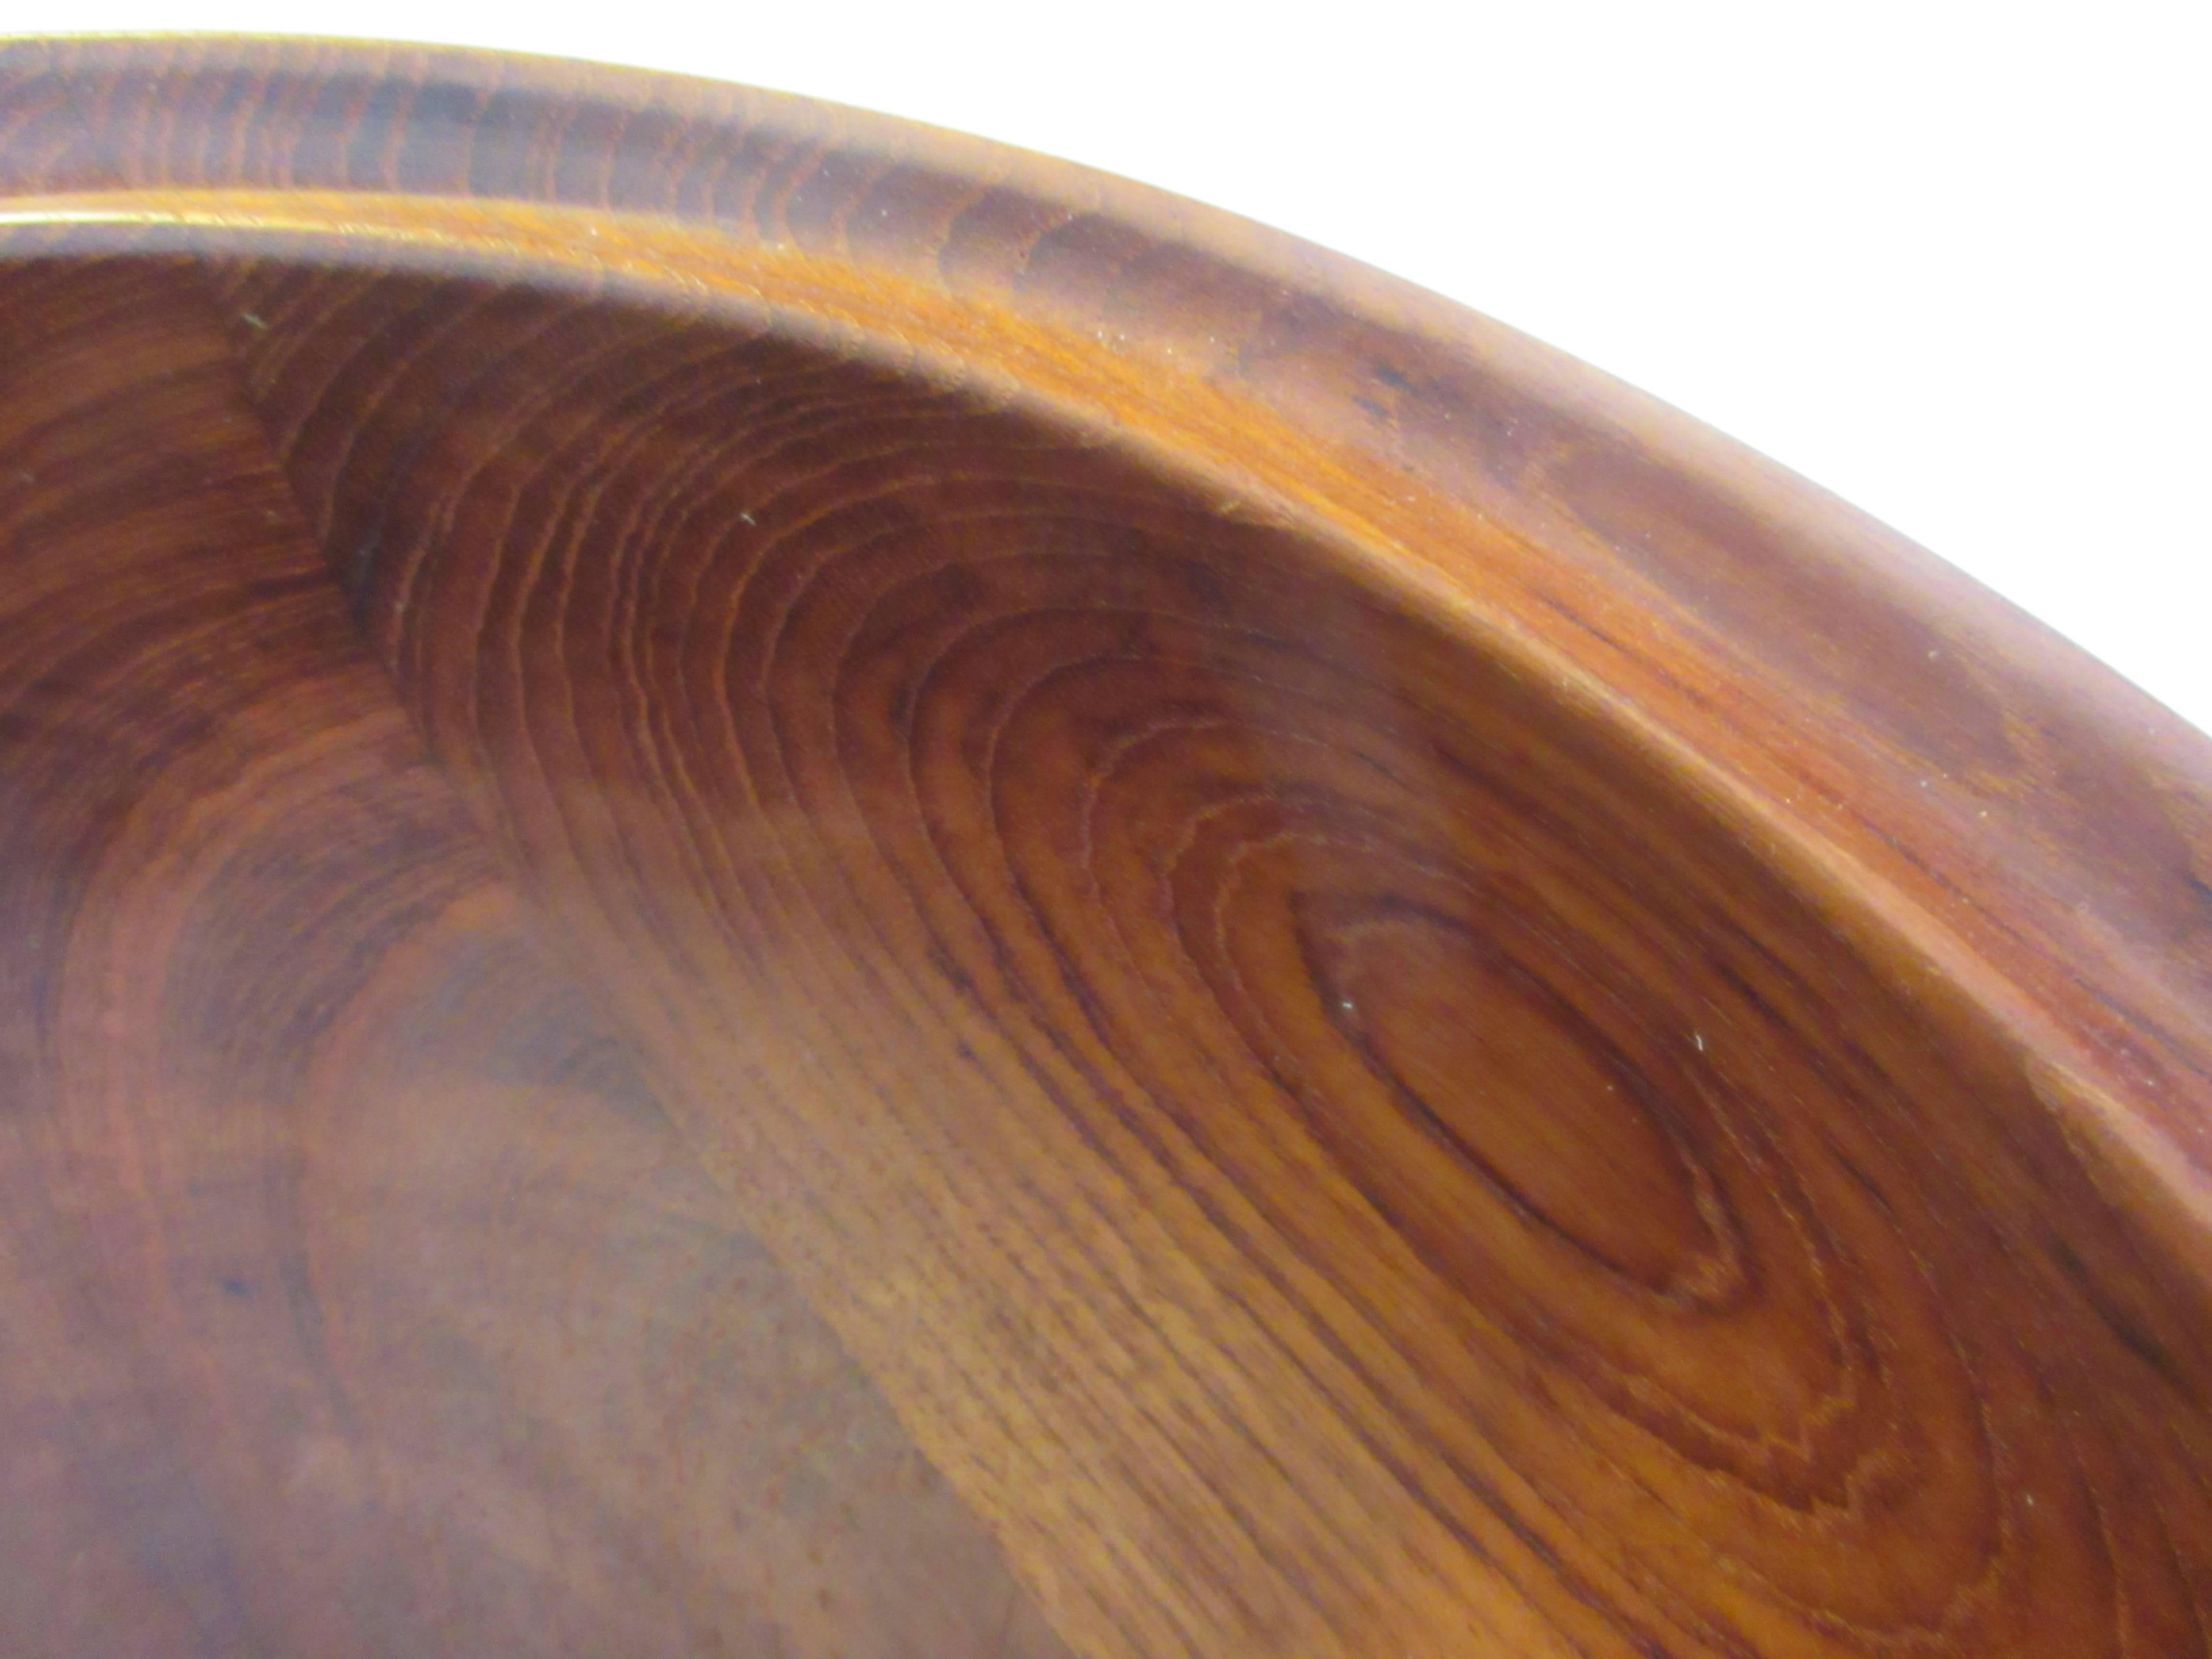 Henning Koppel for Georg Jensen salad bowl in teak with servers. Bought from original owner who lovingly used it for 50 years. Beautiful original condition with no stains or water marks.